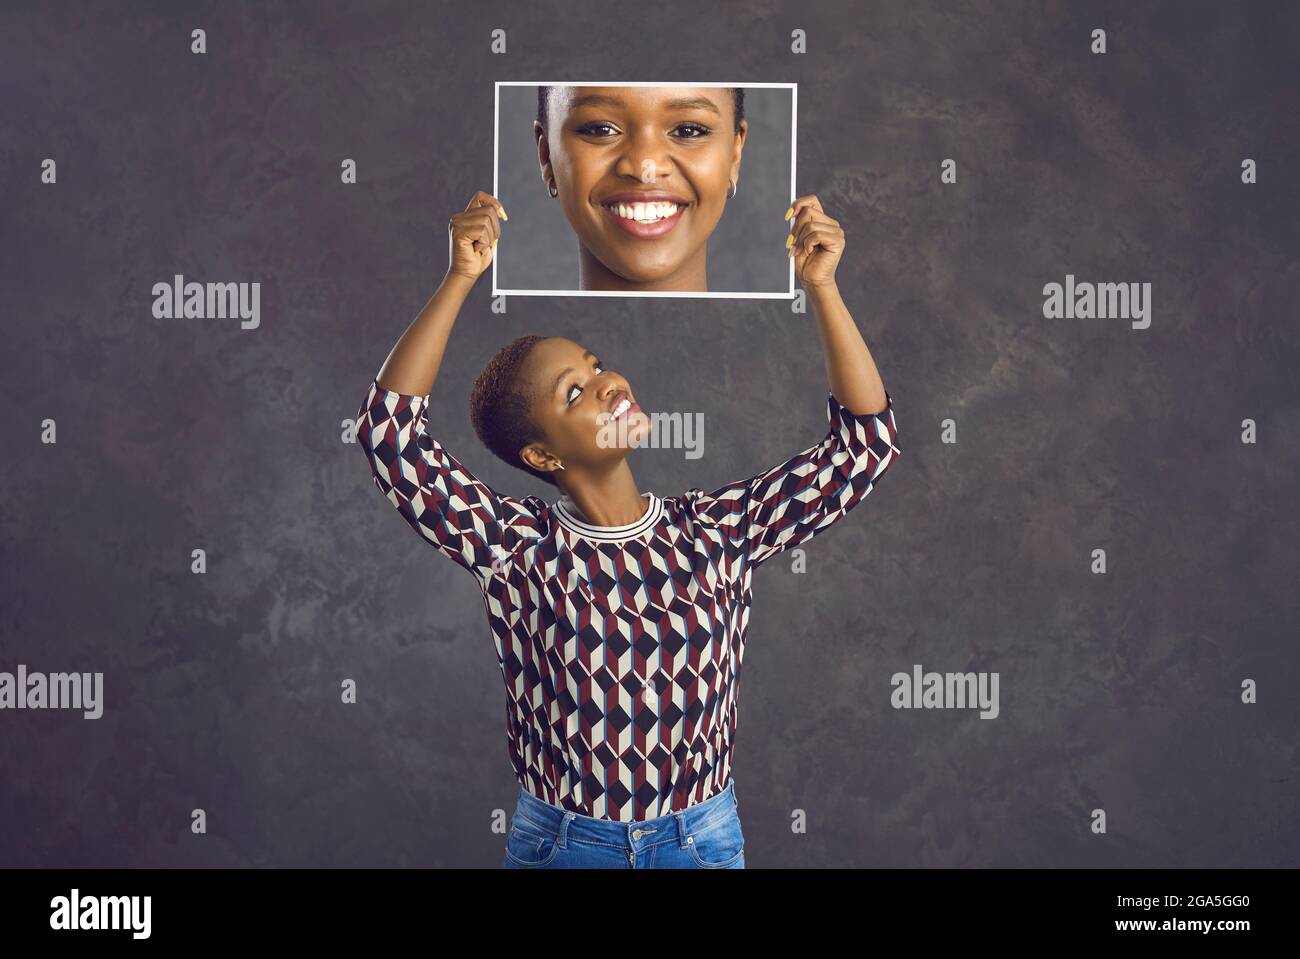 Happy black young woman holding photo of herself standing isolated on grey background Stock Photo